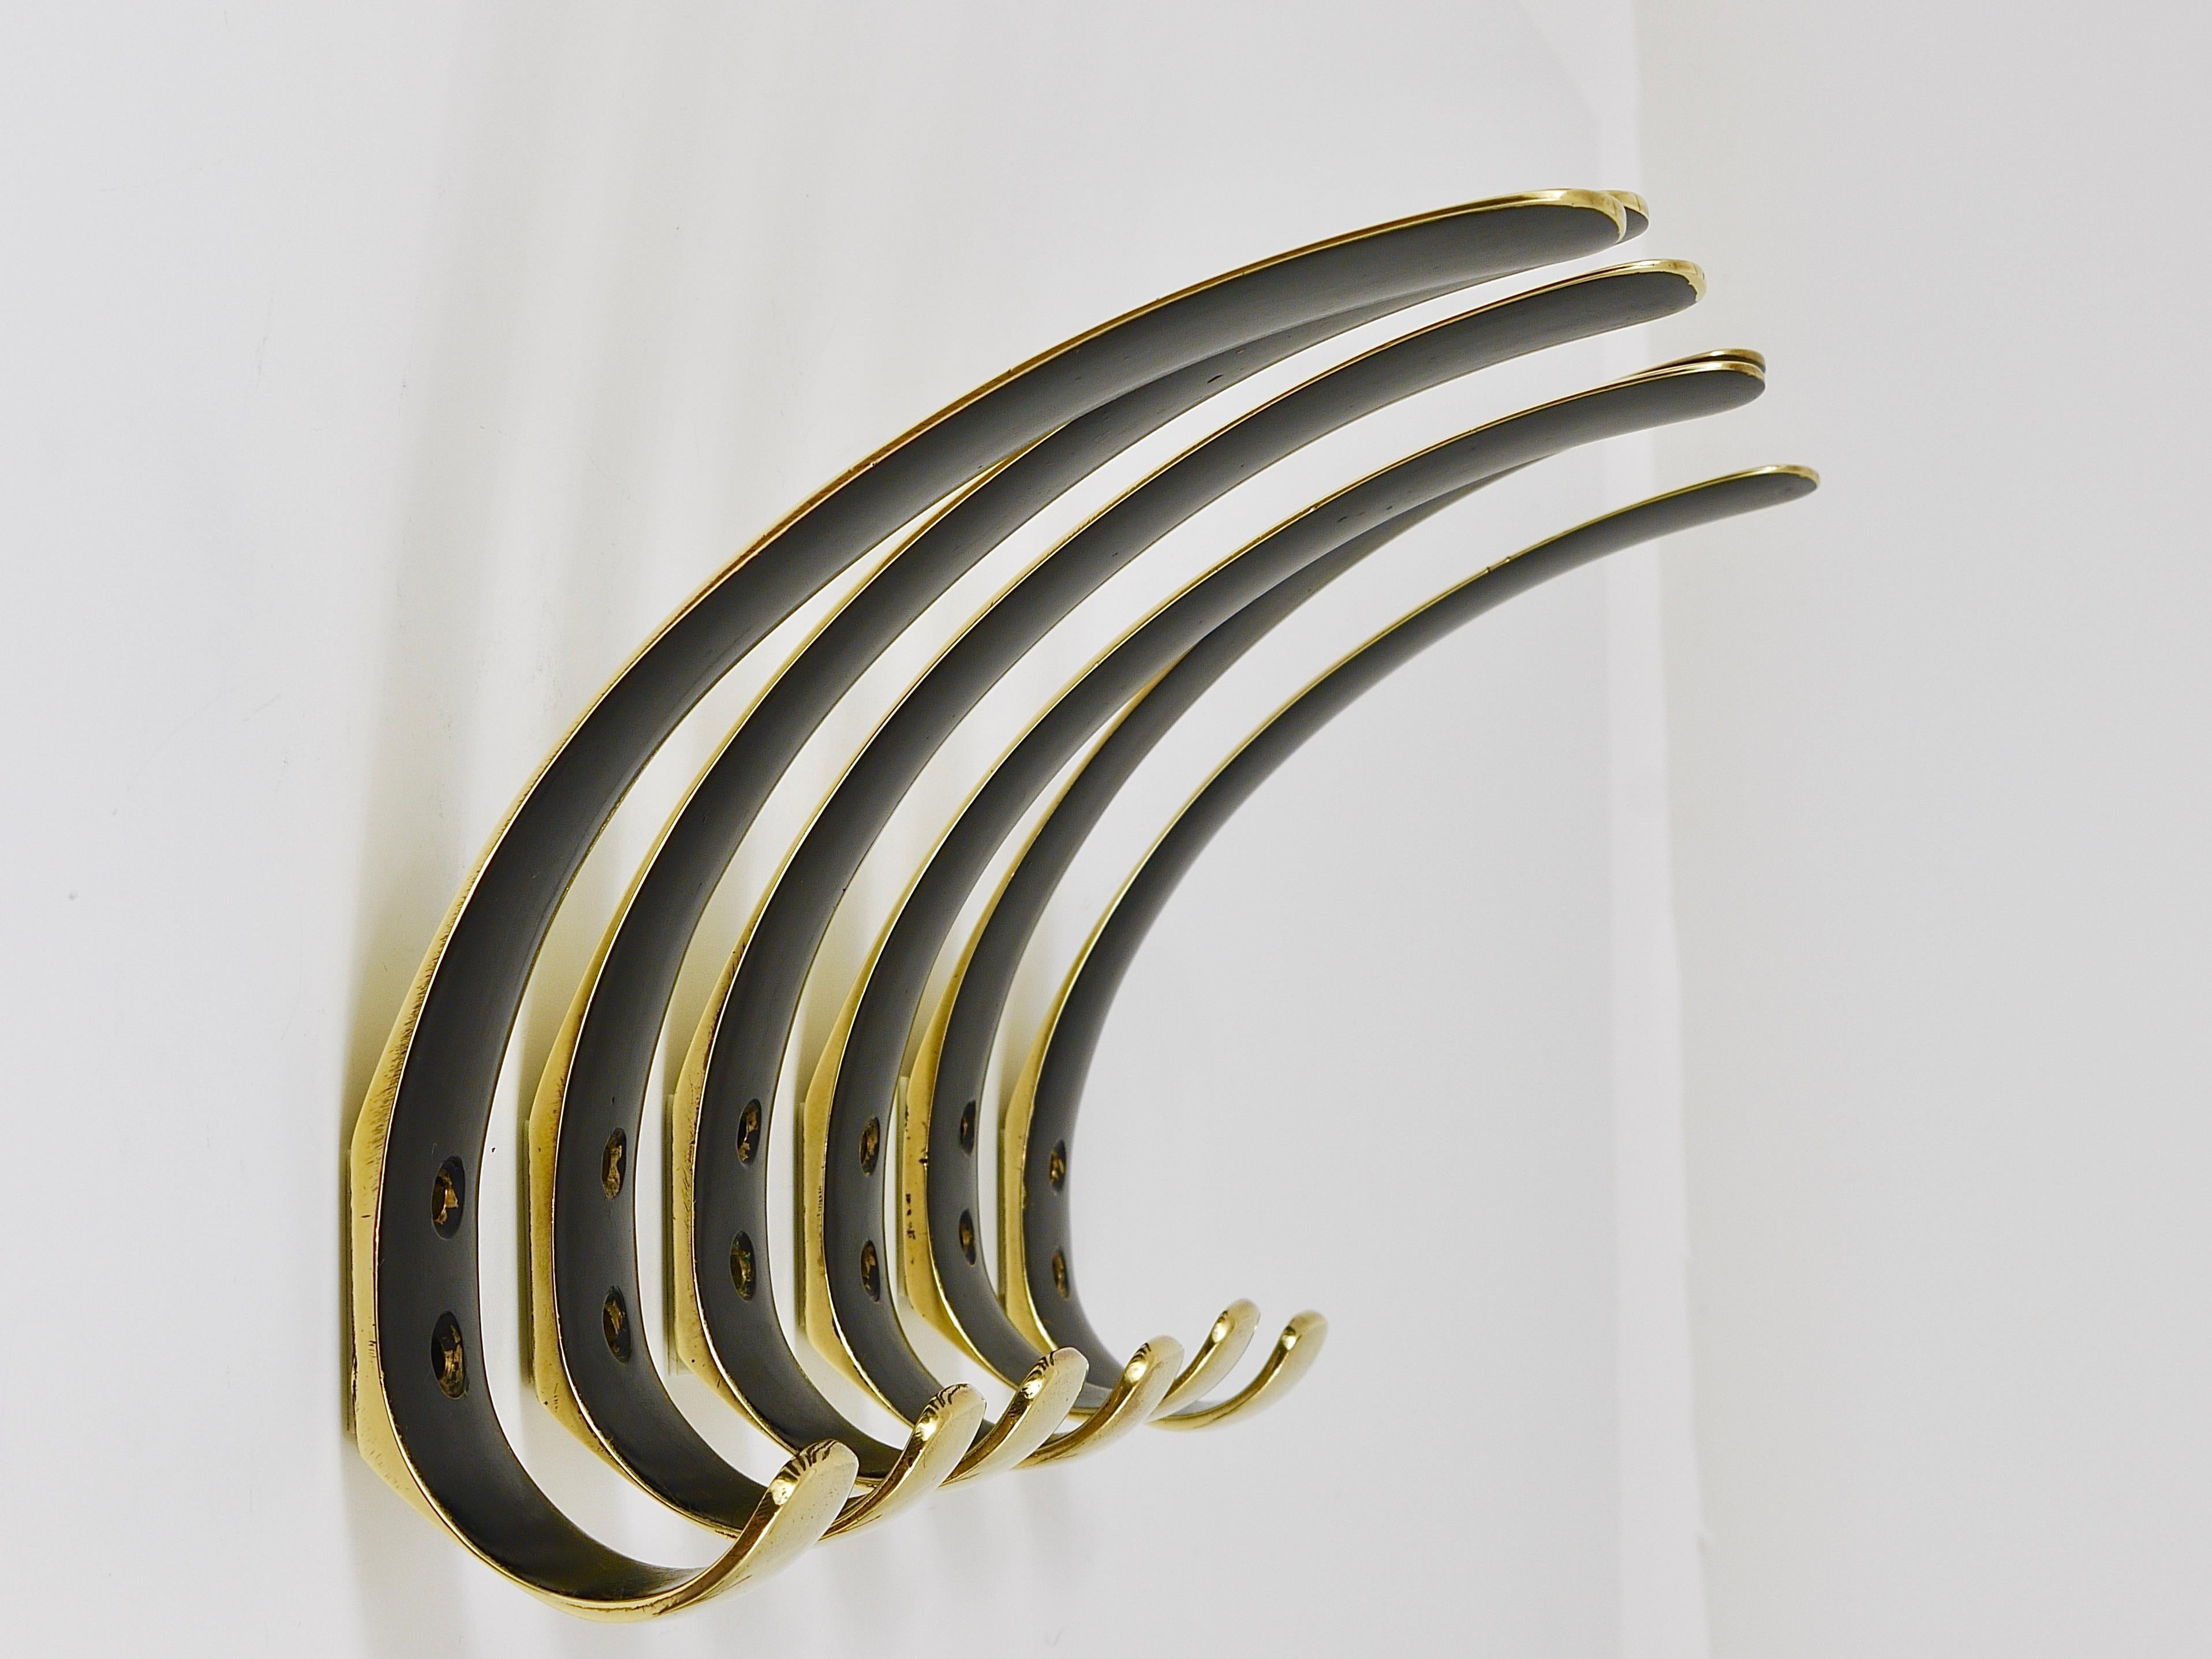 Up to Six Mid-Century Brass Wall Coat Hooks by Herta Baller, Austria, 1950s For Sale 6